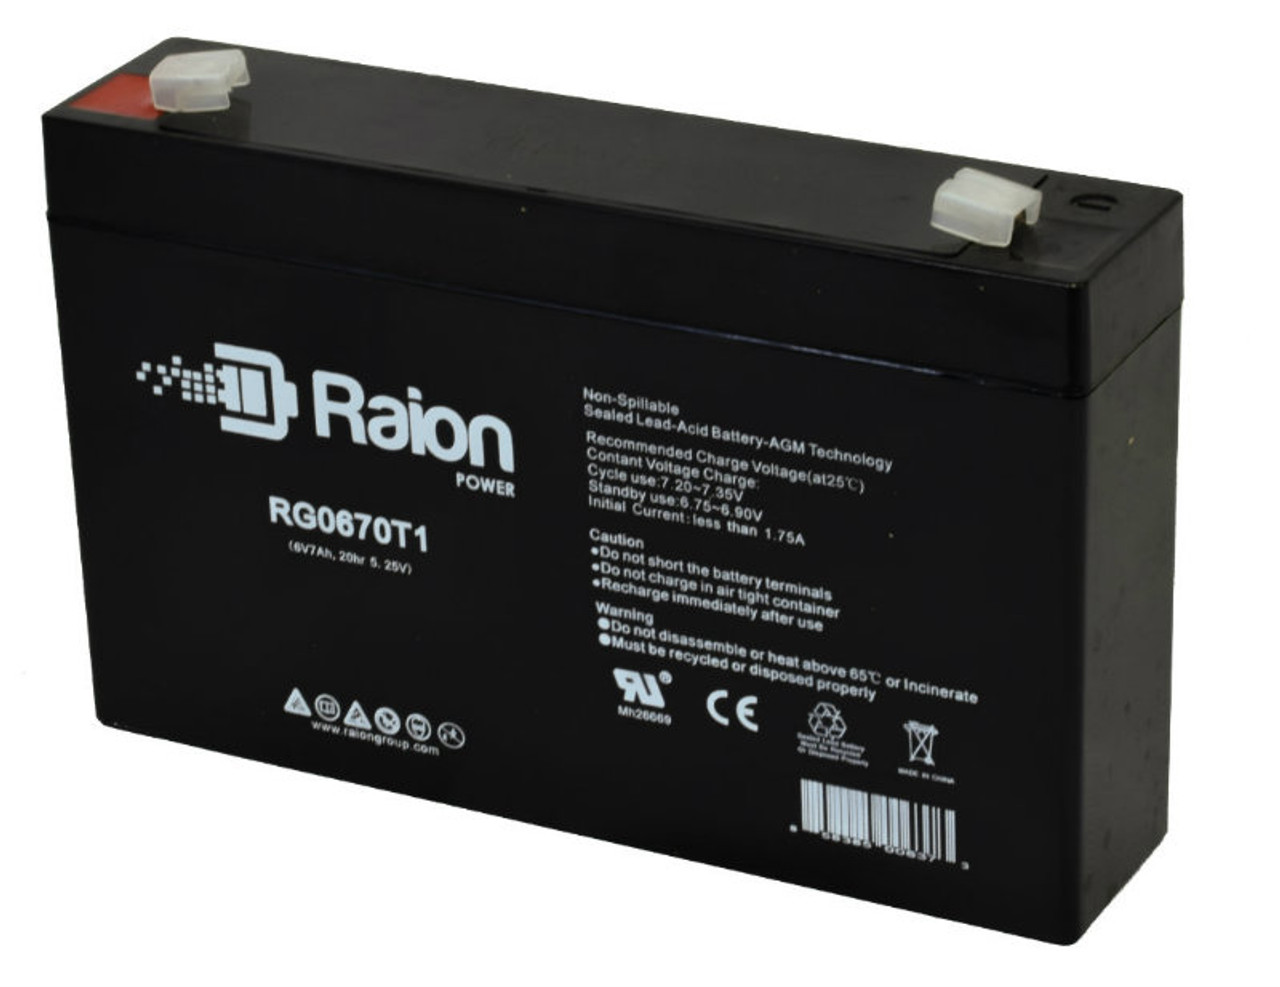 Raion Power RG0670T1 Replacement Battery for Consent GS66 OEM Battery